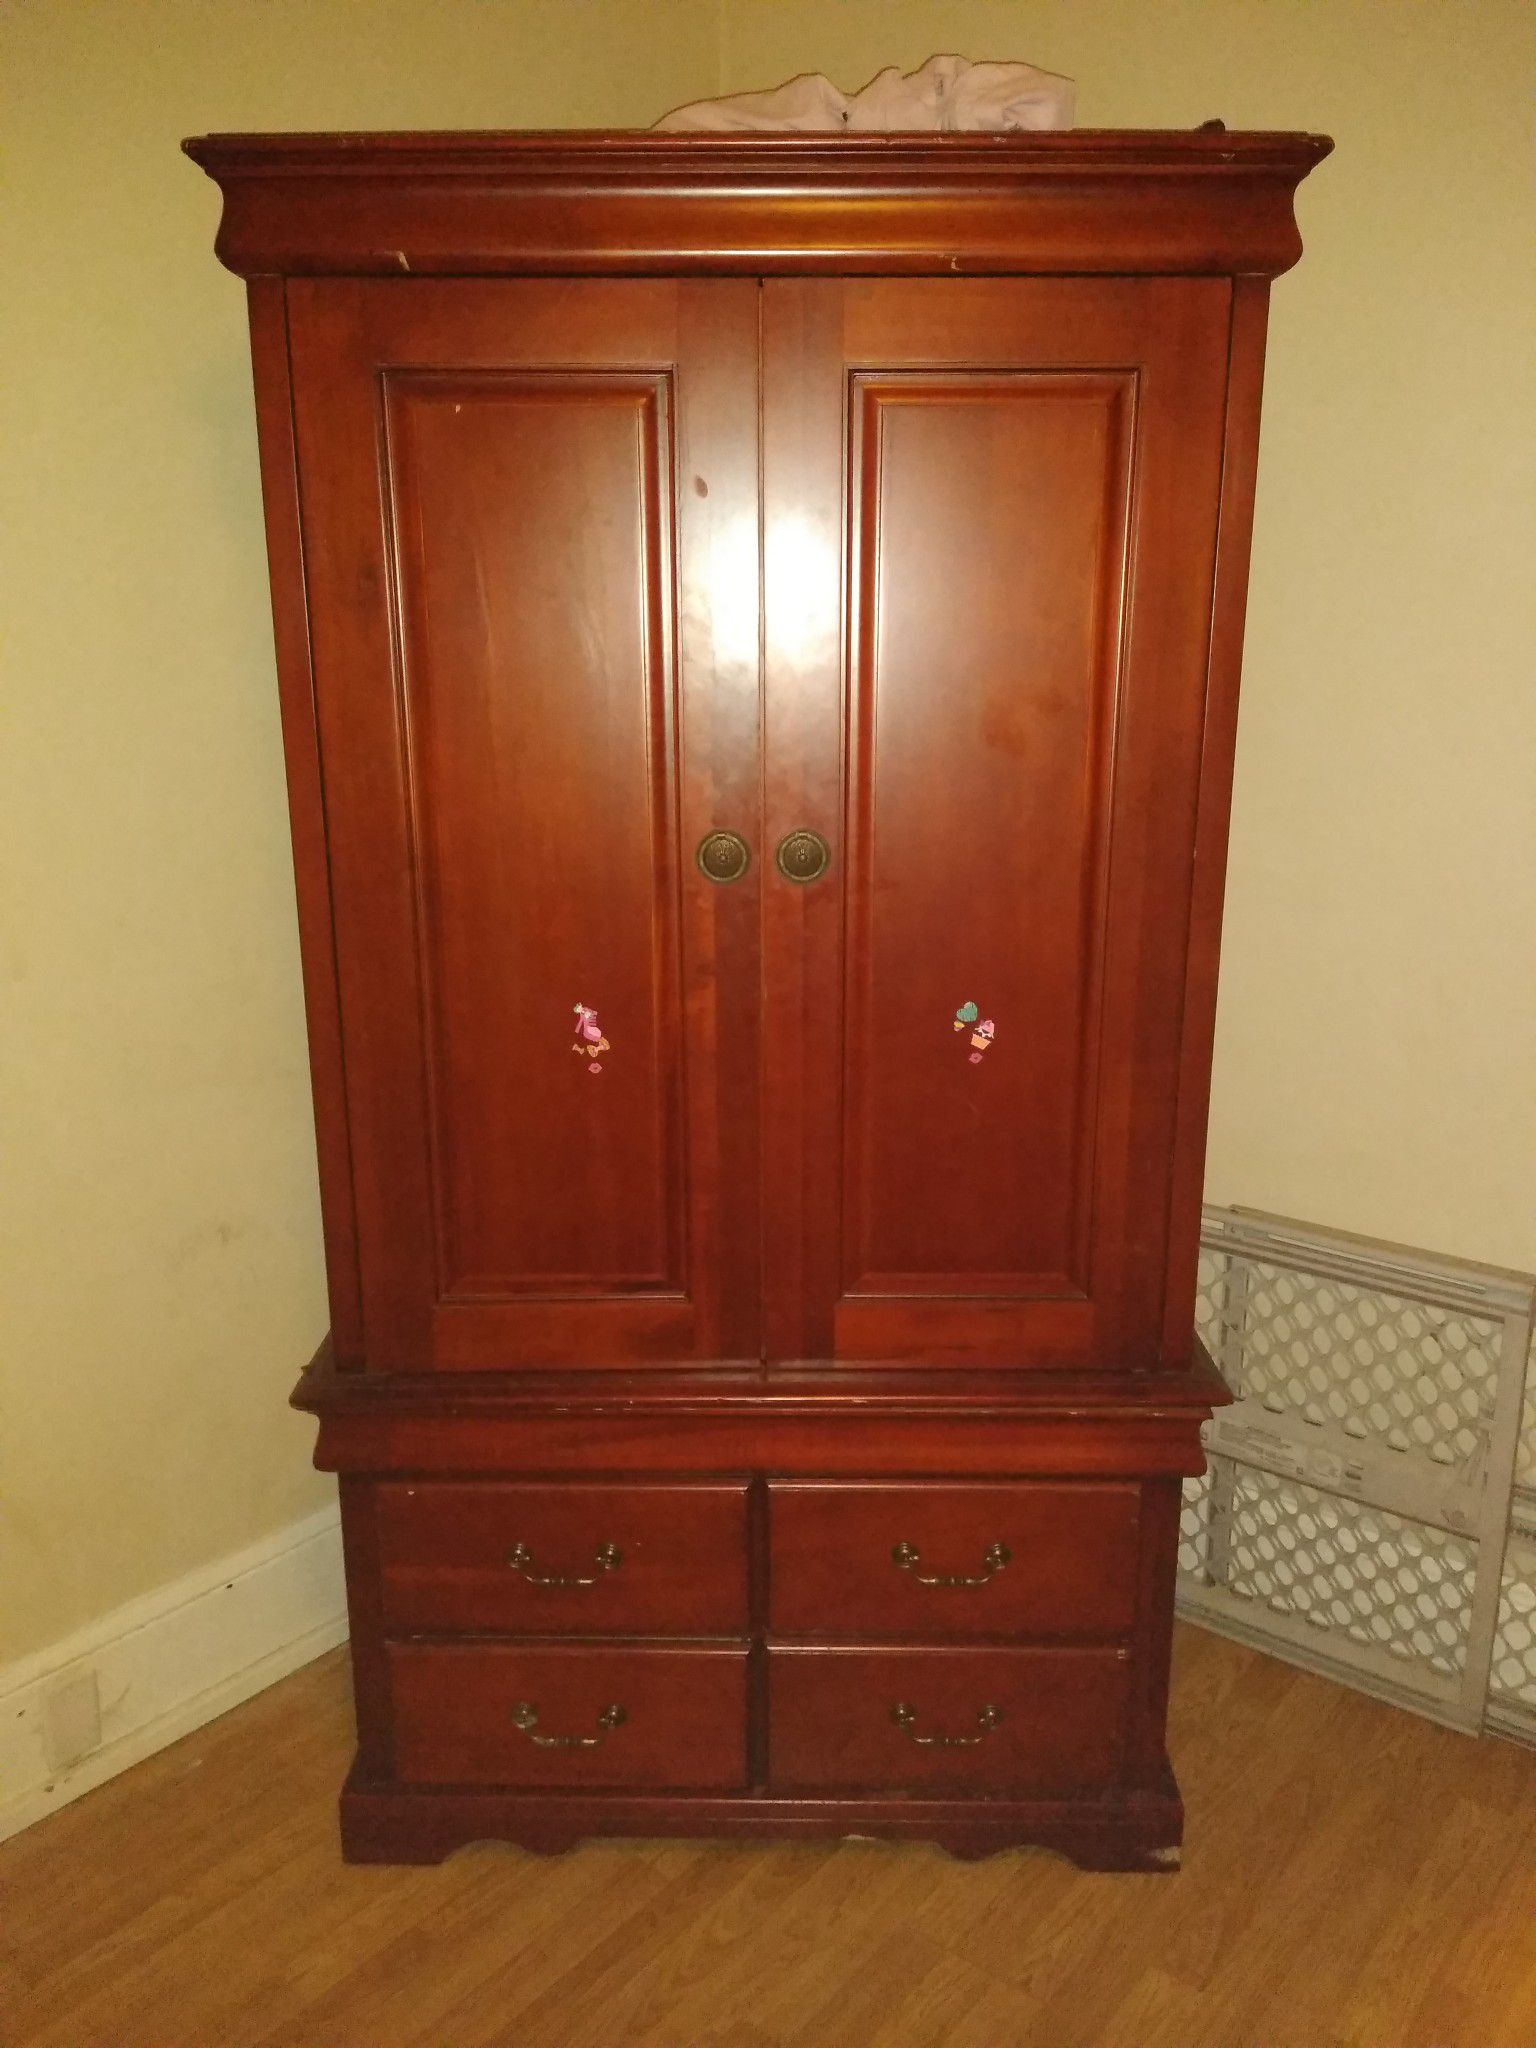 Hey nice cabinet out of solid wood just trying to collect money for rent